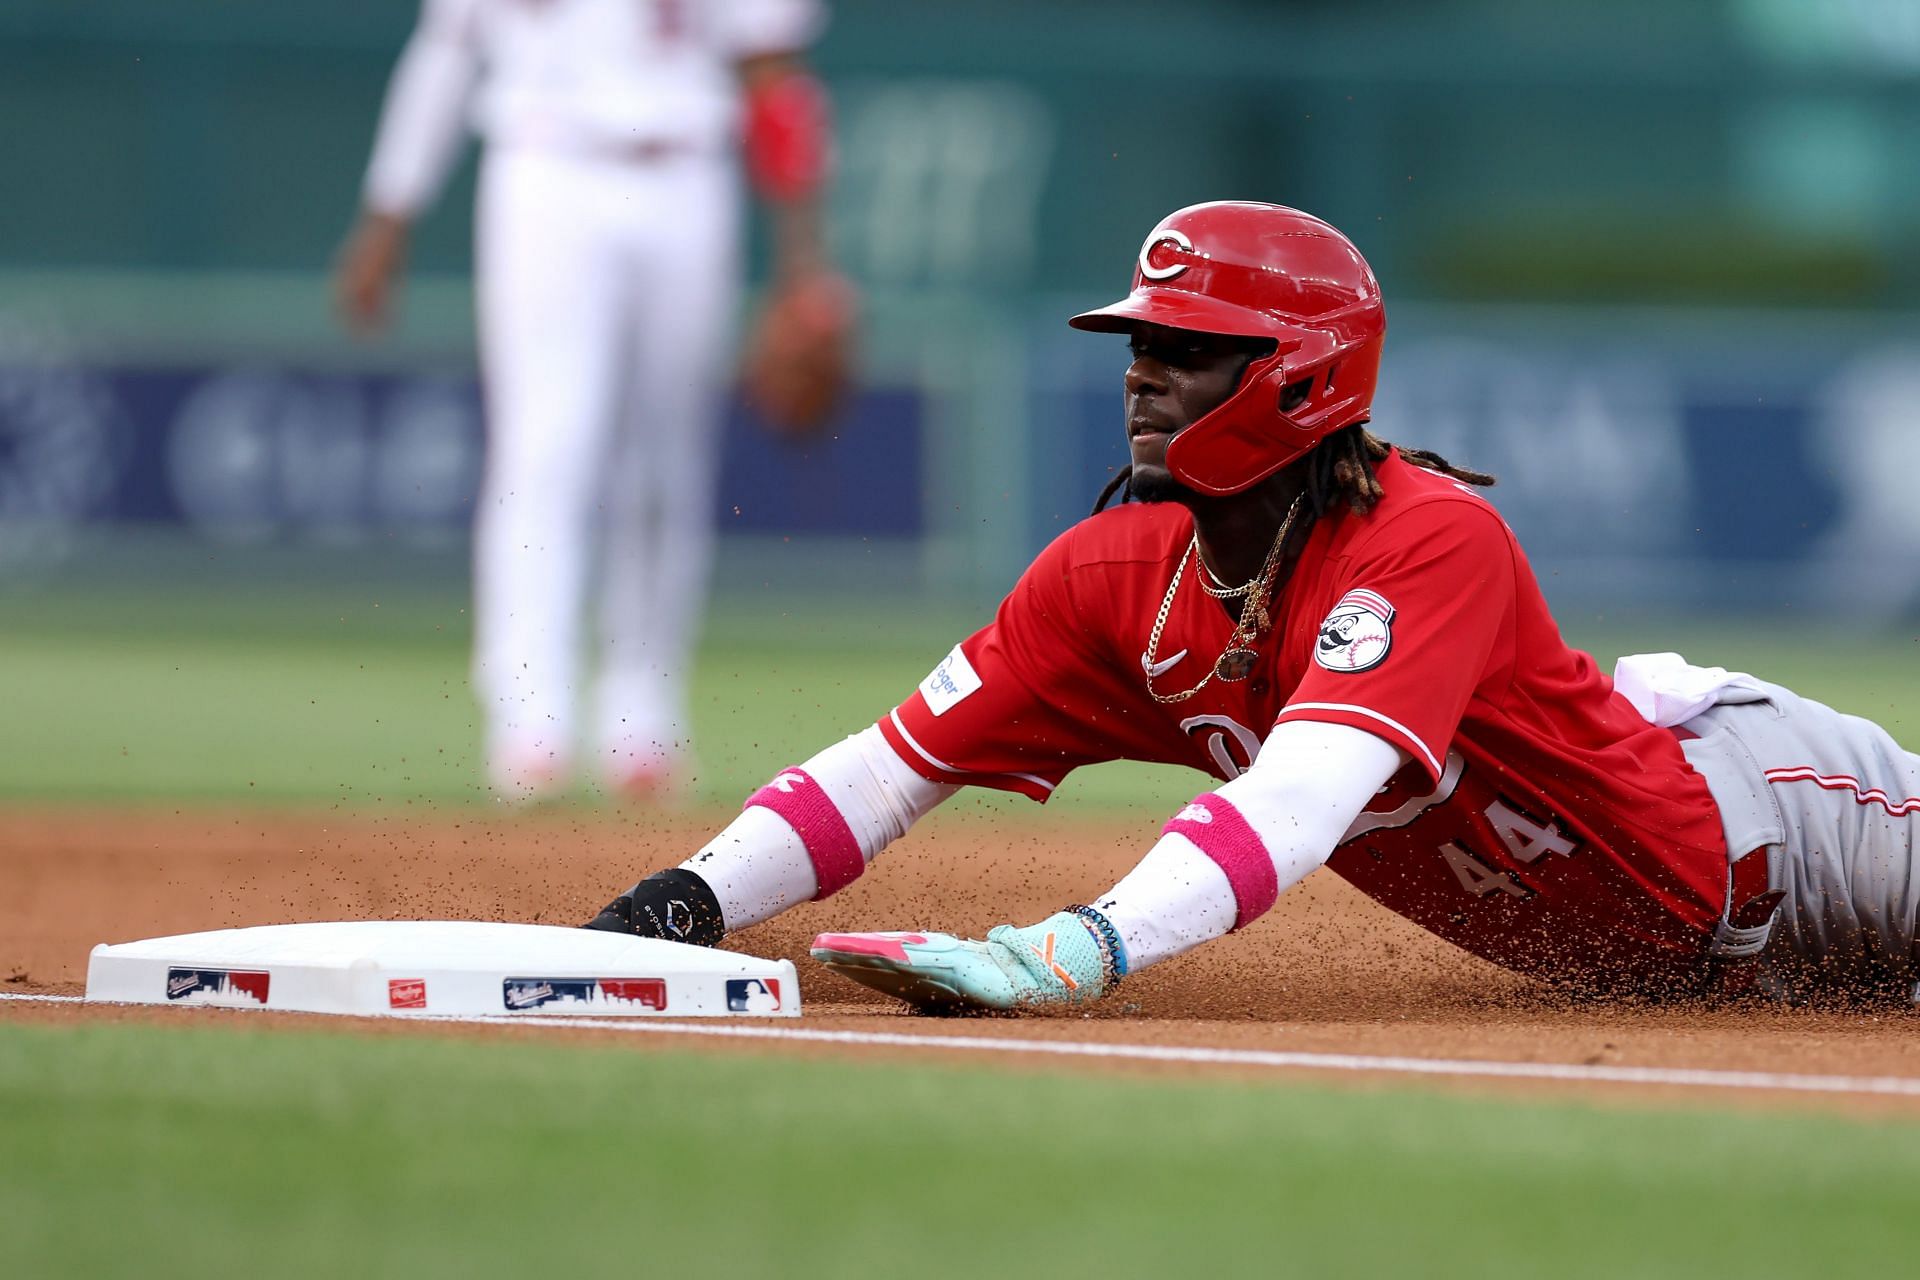 Elly De La Cruz of the Cincinnati Reds slides safely into third base in the second inning against the Washington Nationals.